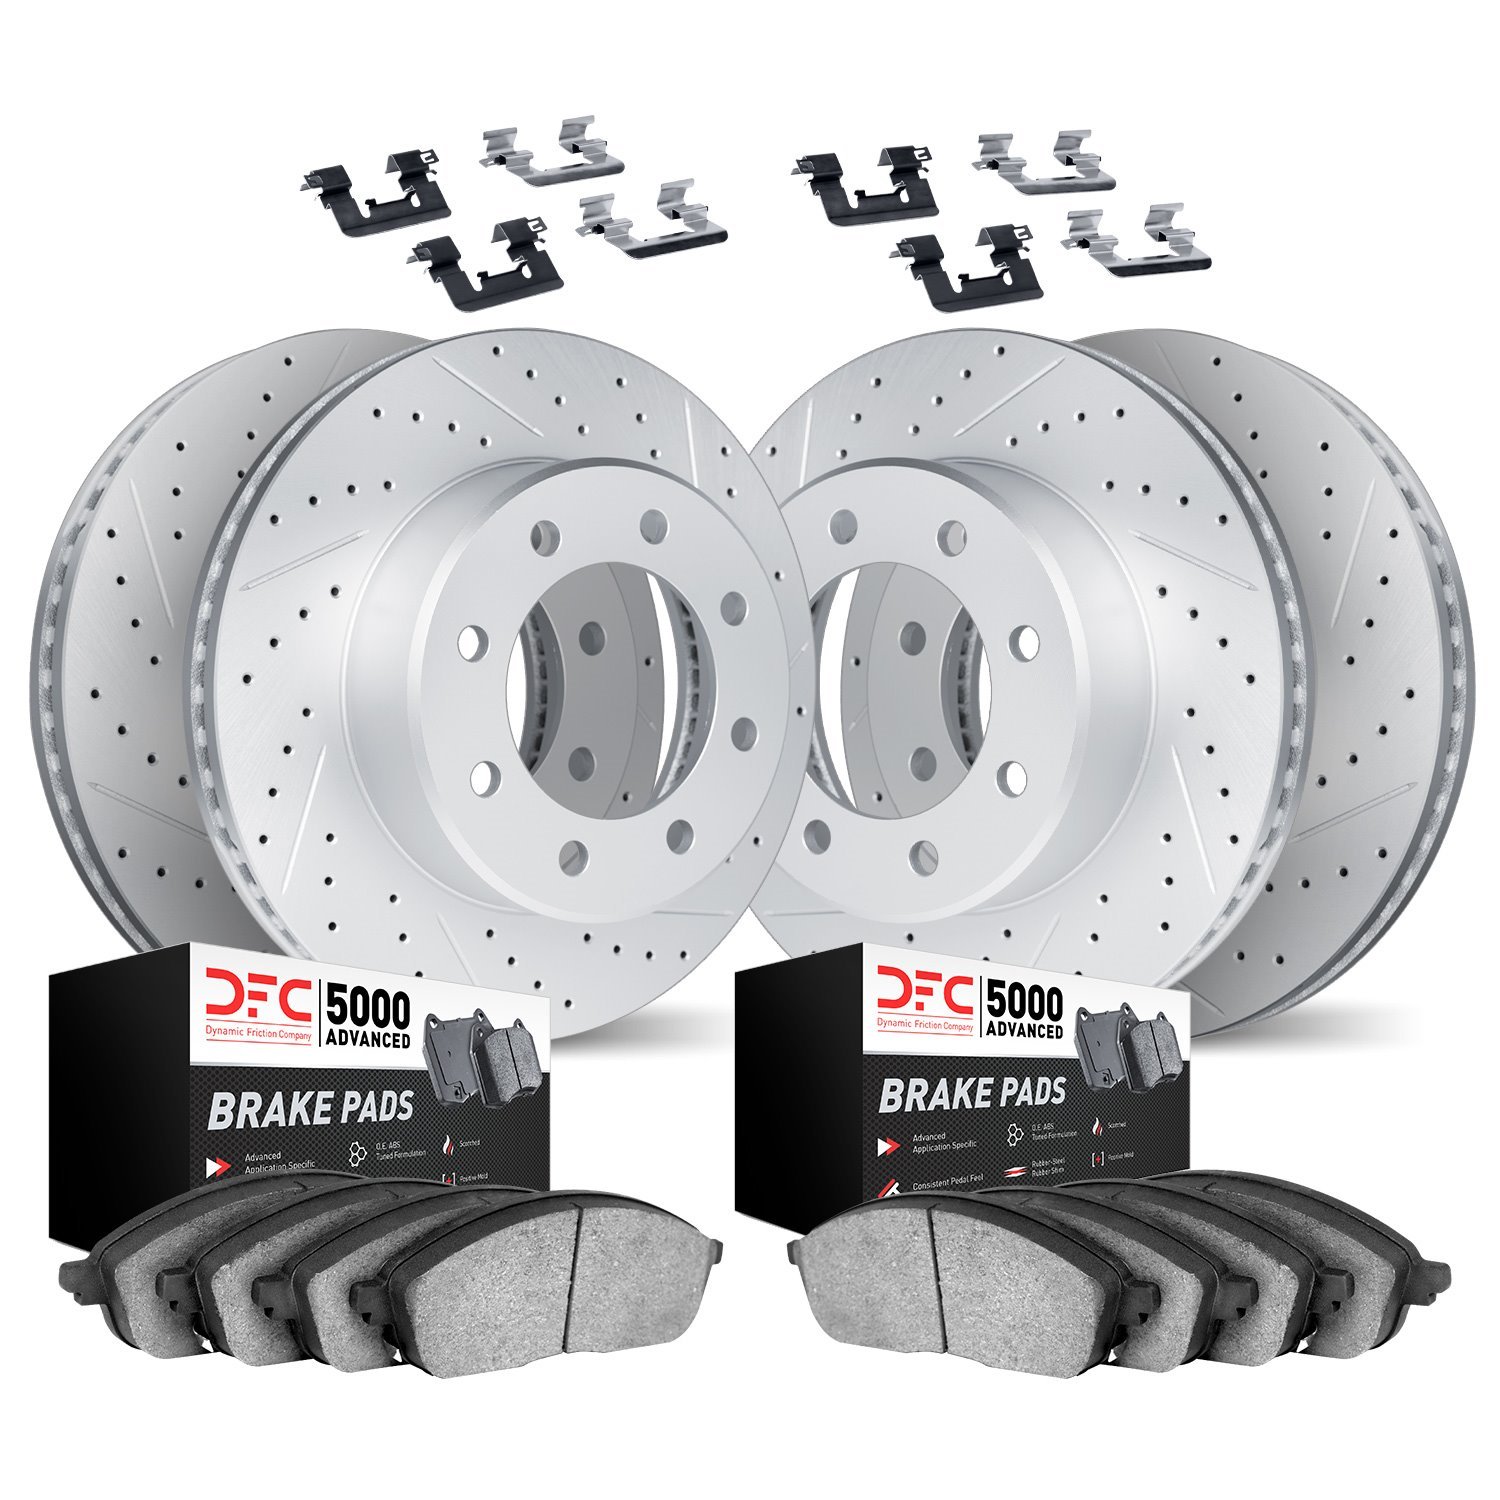 2514-48039 Geoperformance Drilled/Slotted Rotors w/5000 Advanced Brake Pads Kit & Hardware, Fits Select GM, Position: Front and